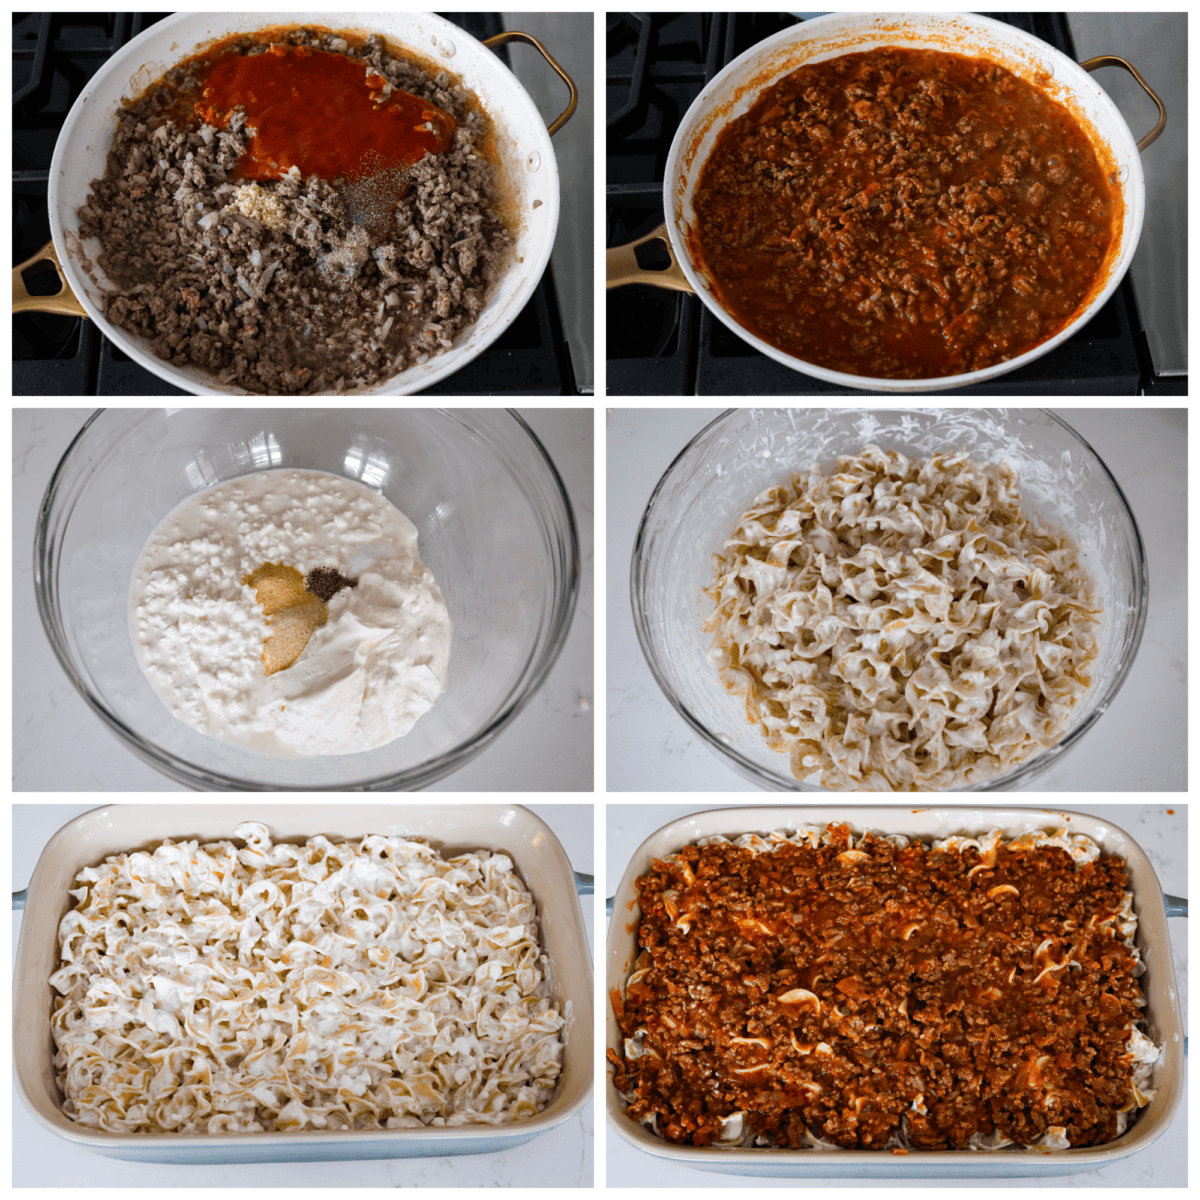 6-photo collage of the beef mixture being prepared it being added to a casserole dish along with the pasta and sauces.